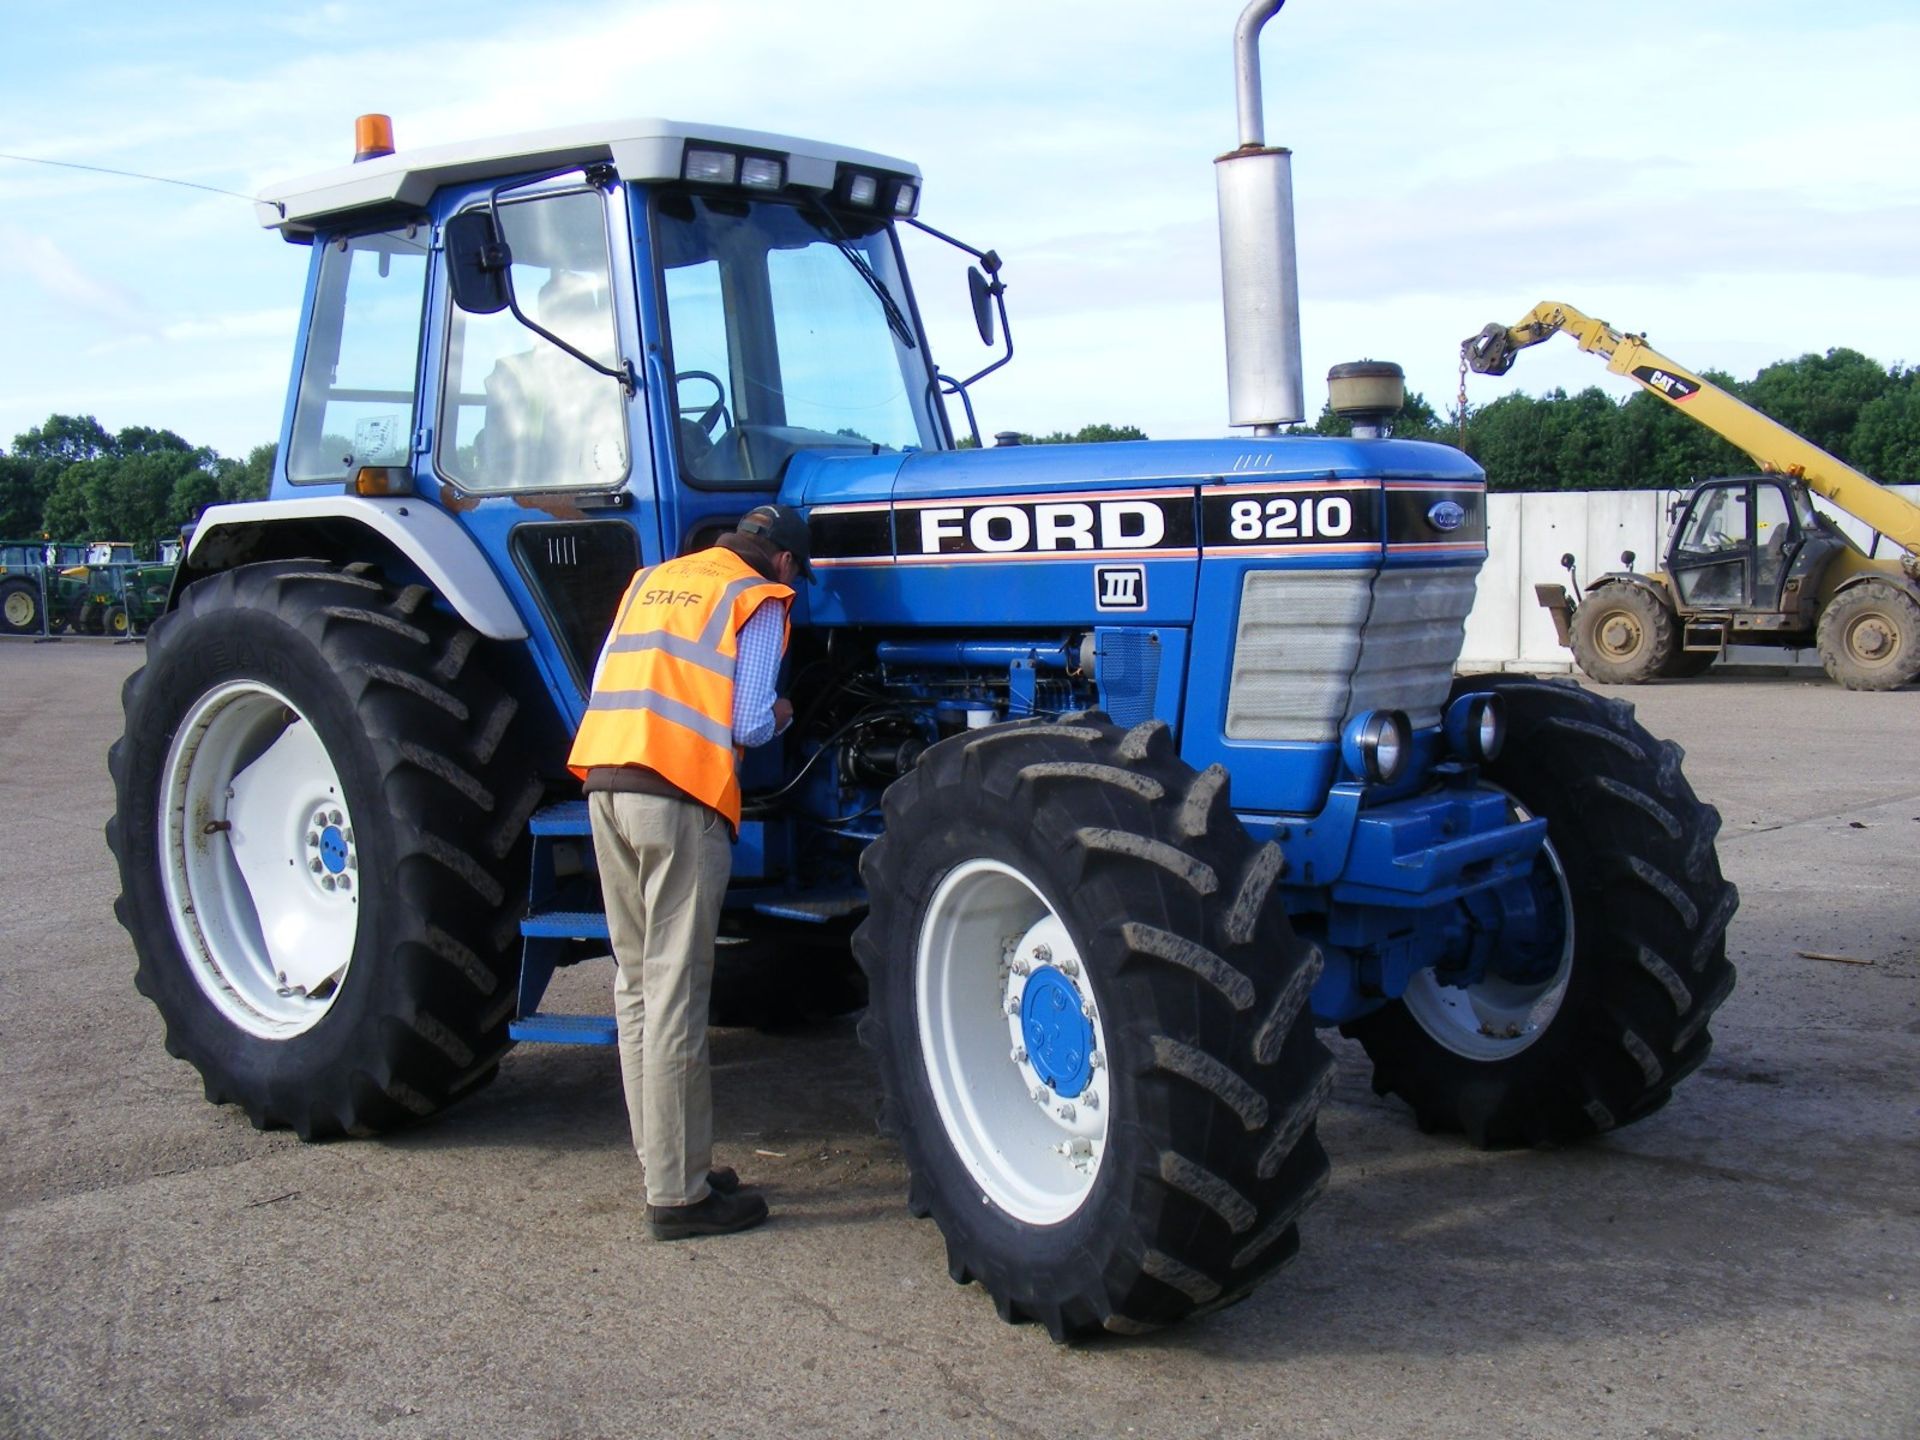 1991 Ford 8210 4wd Tractor - Image 2 of 10